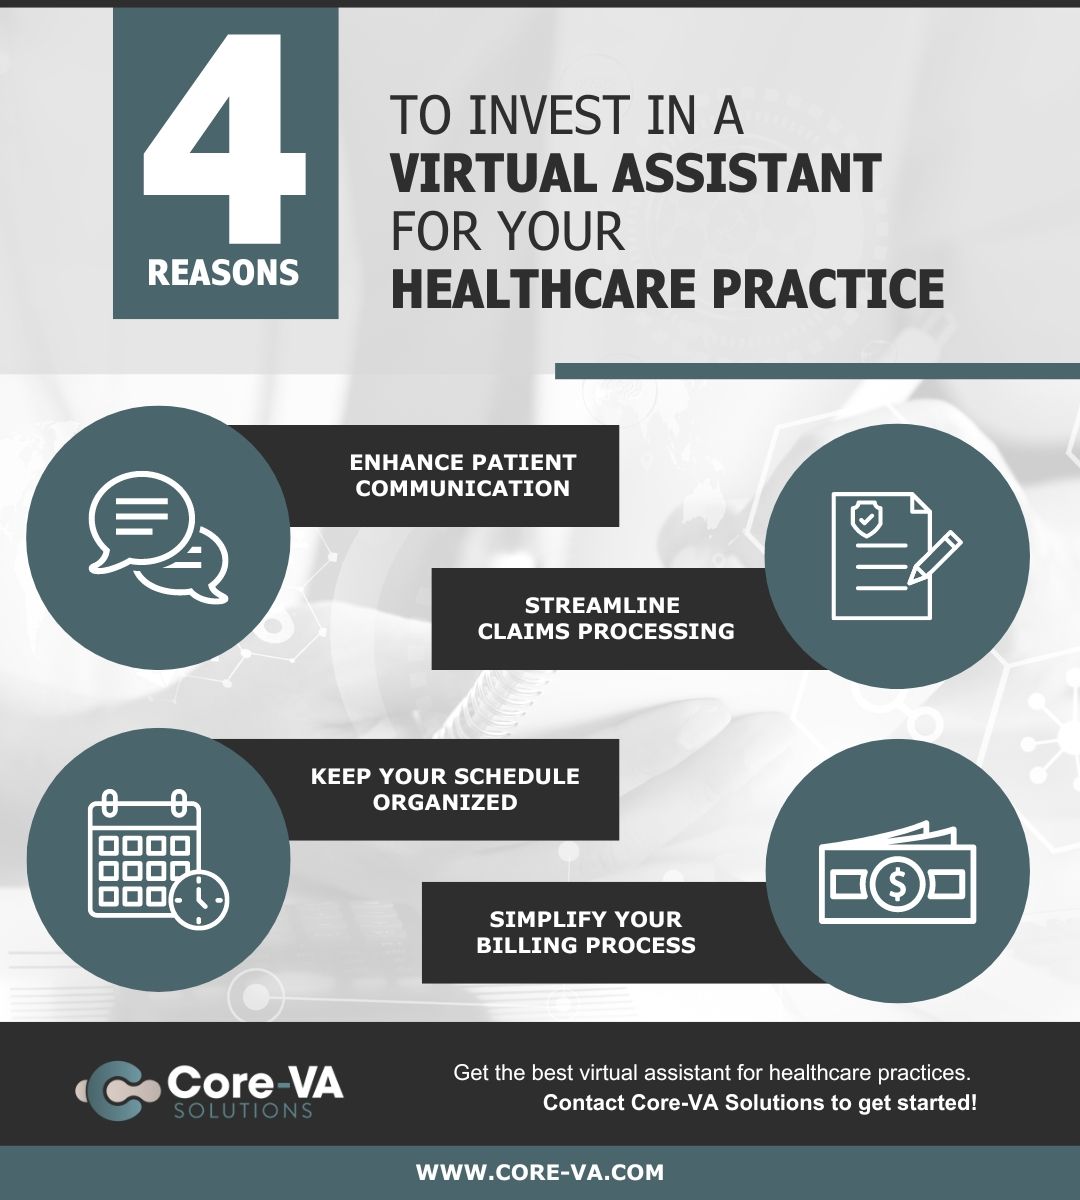 M37019 - Infographic - 4 Reasons to Invest in a Virtual Assistant for Your Healhcare Practice.jpg